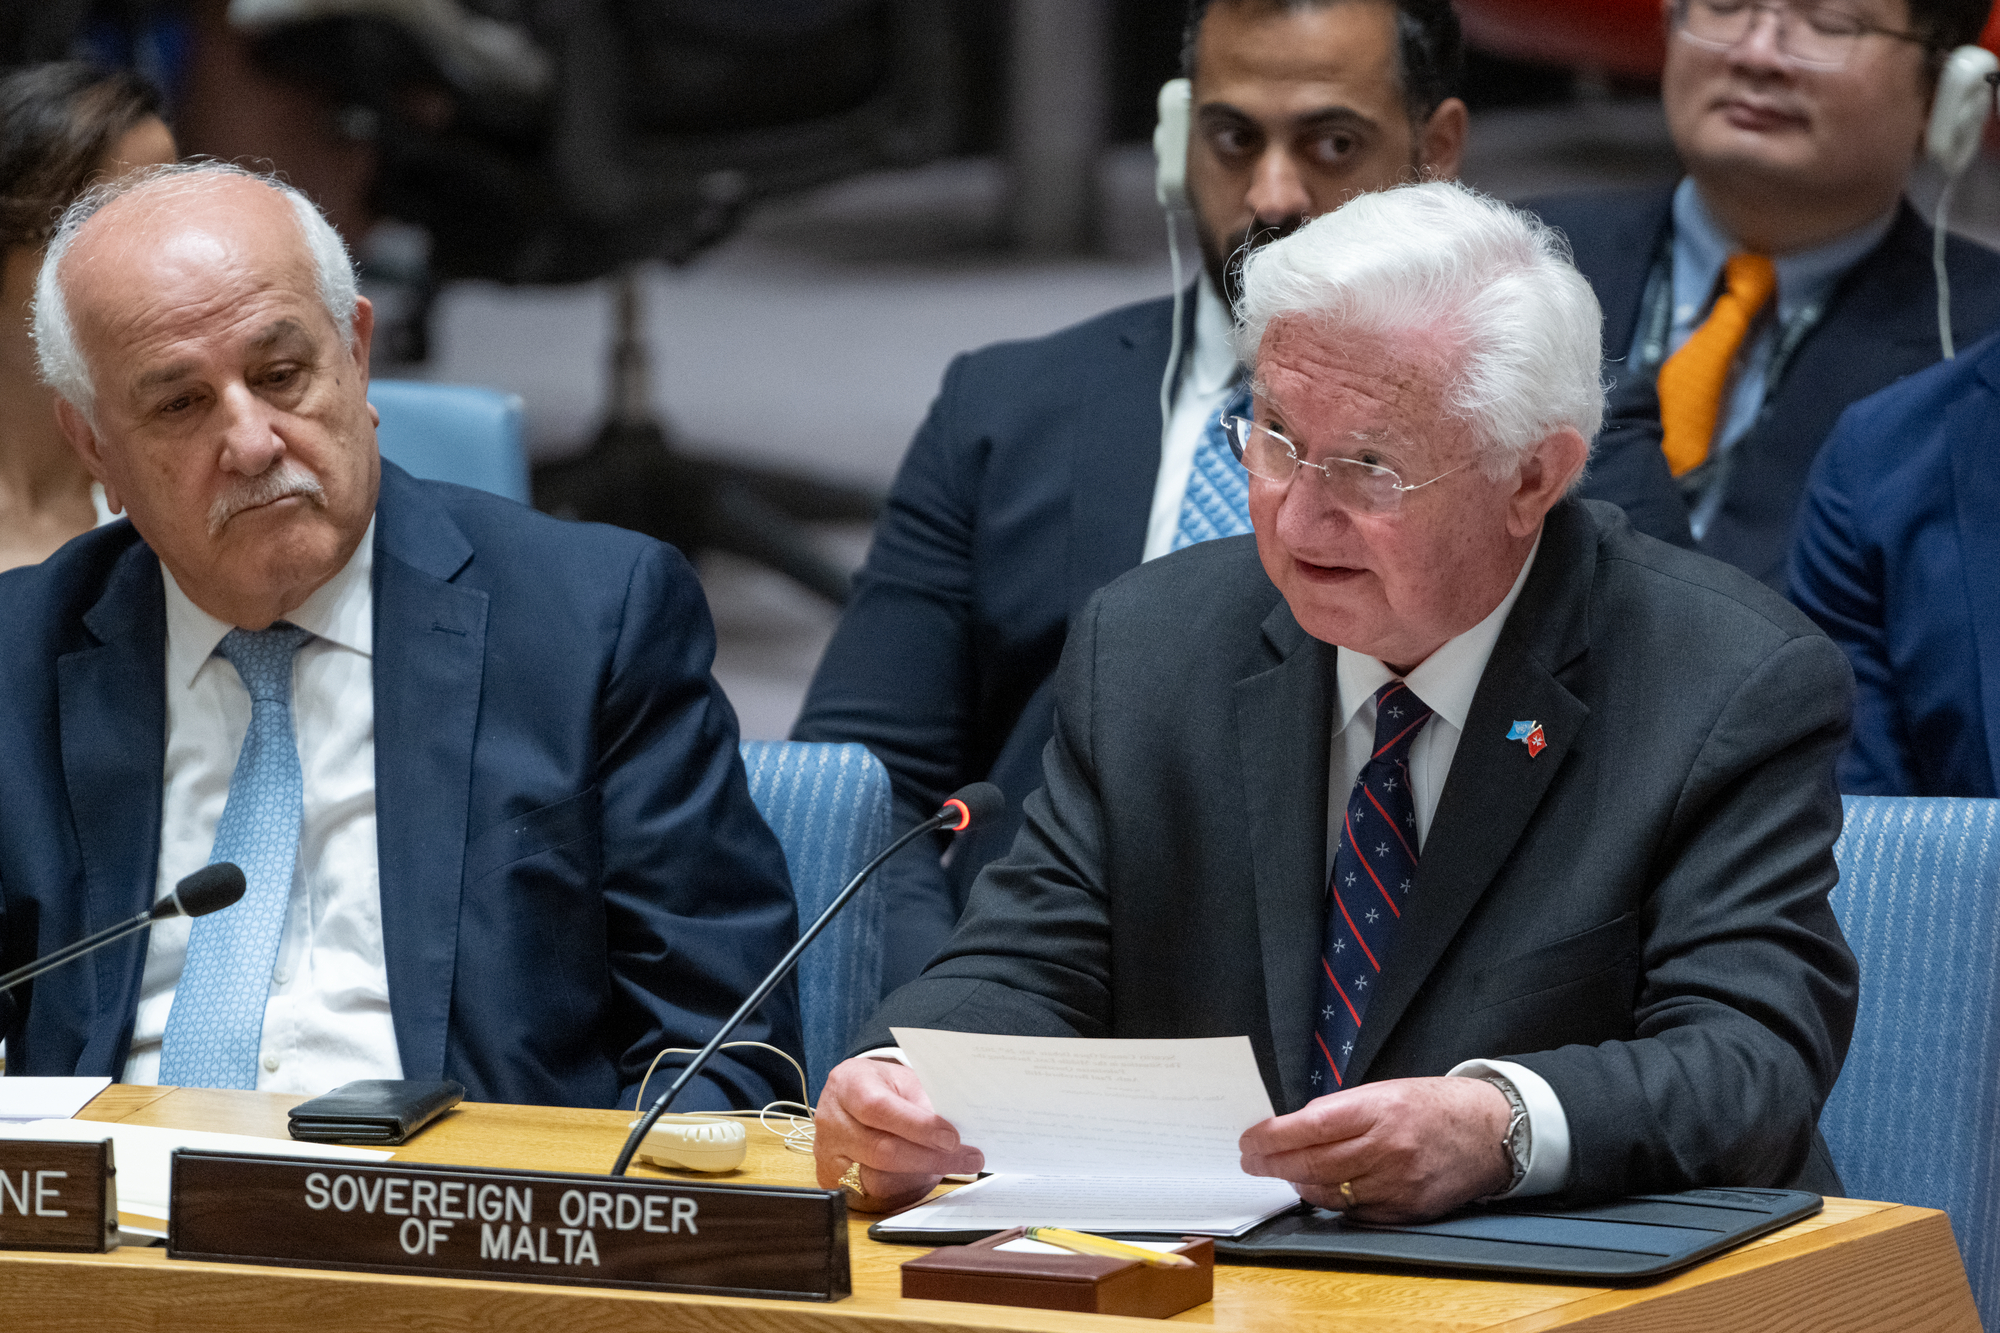 For the second time since the Order’s recognition as Permanent Observer to the United Nations, the Delegation, led by H.E. Ambassador Beresford-Hill, addressed the Security Council during the Open Debate on Middle East and Palestine.